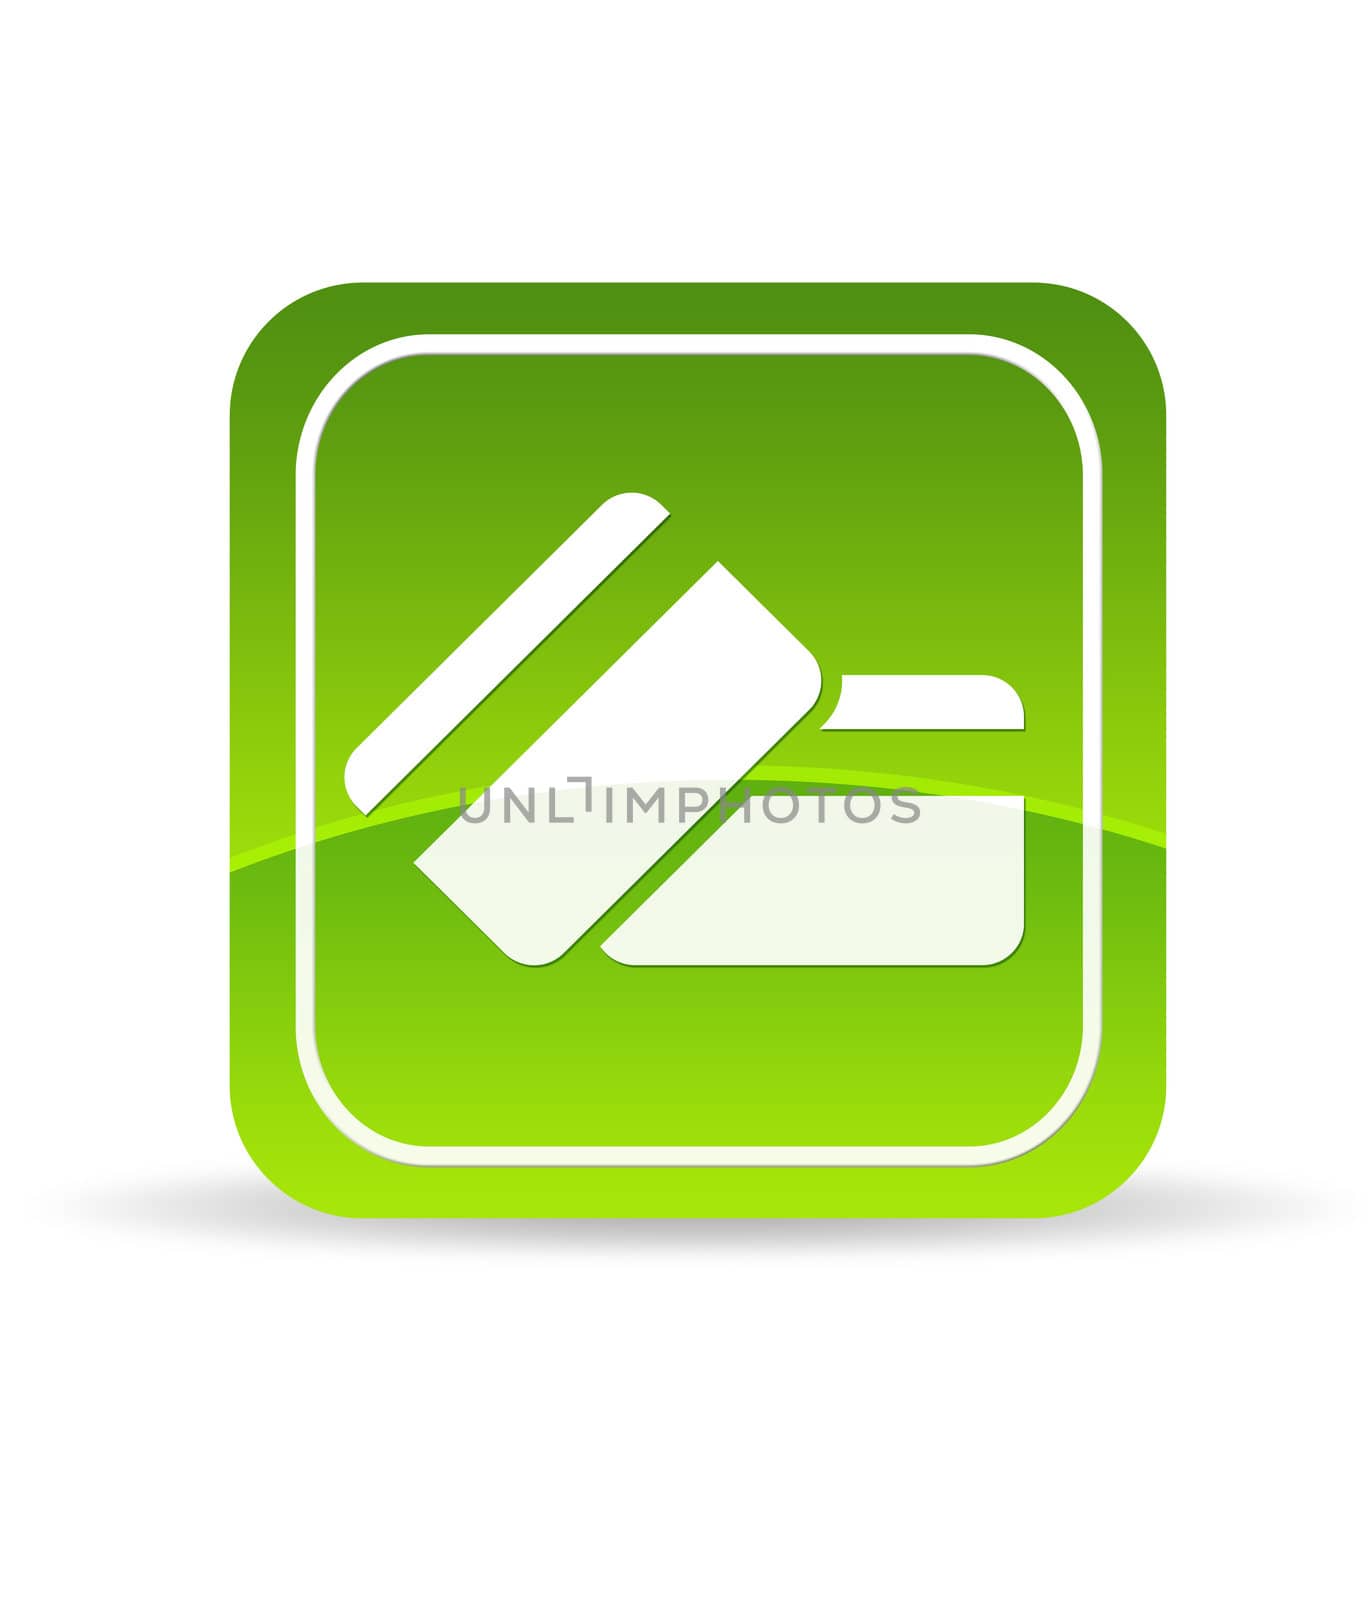 High resolution green credit debit card icon on white background.